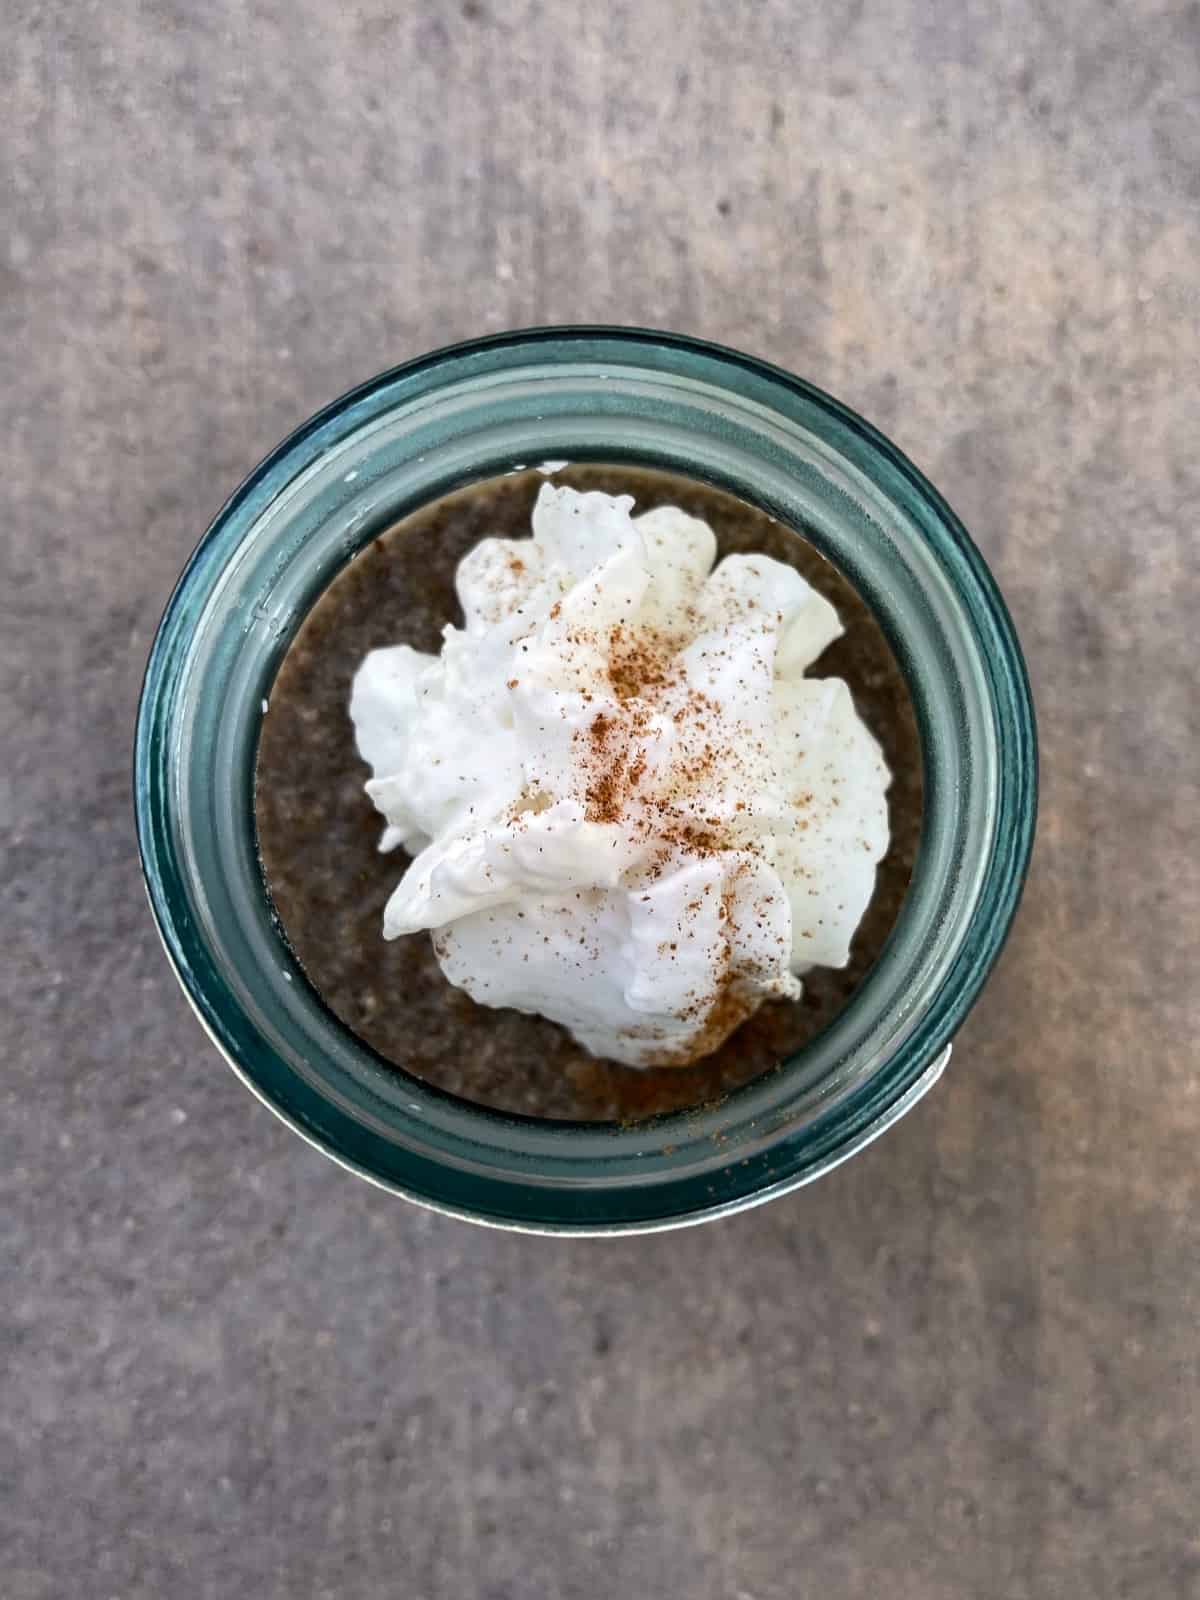 Cappuccino chia seed pudding in Mason jar with whipped cream and cinnamon sprinkle from above.